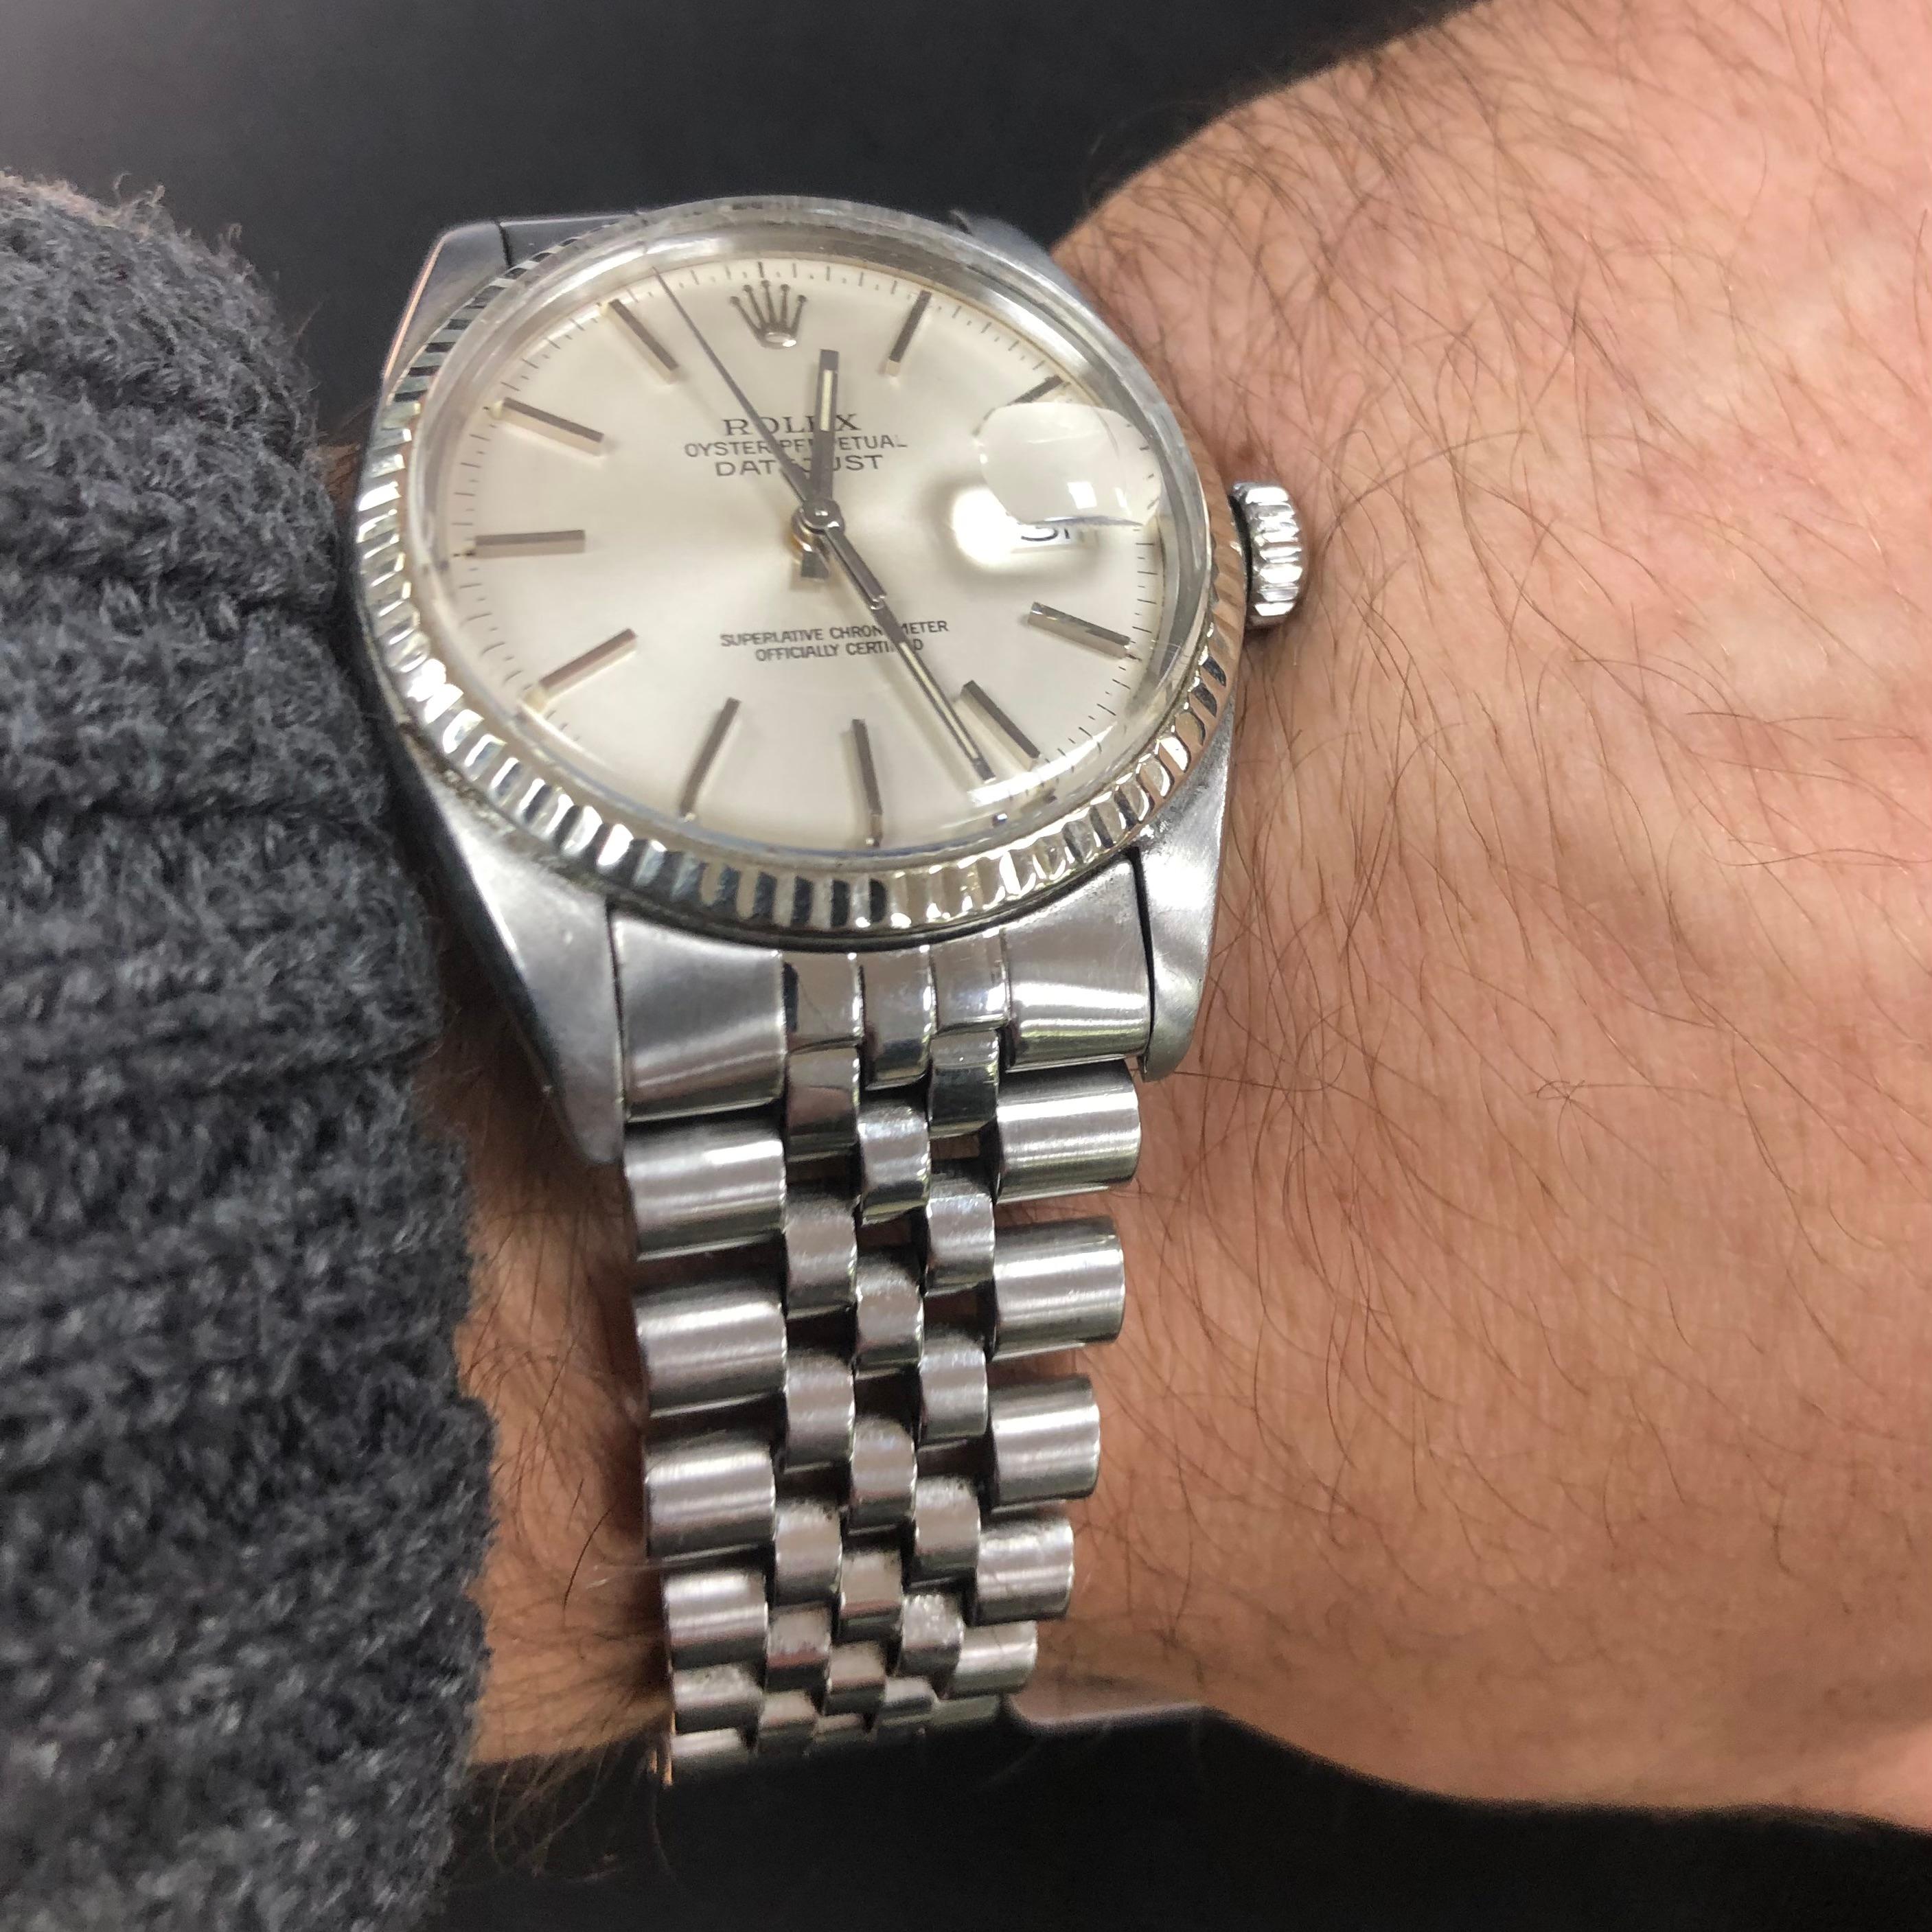 Rolex Oyster Perpetual DateJust 1603 36mm silver dial. The movement is an official certified chronometer self-winding automatic movement. 

This Rolex Oyster Perpetual DateJust 36mm 1603 timepiece features a stainless steel jubilee Bracelet with a